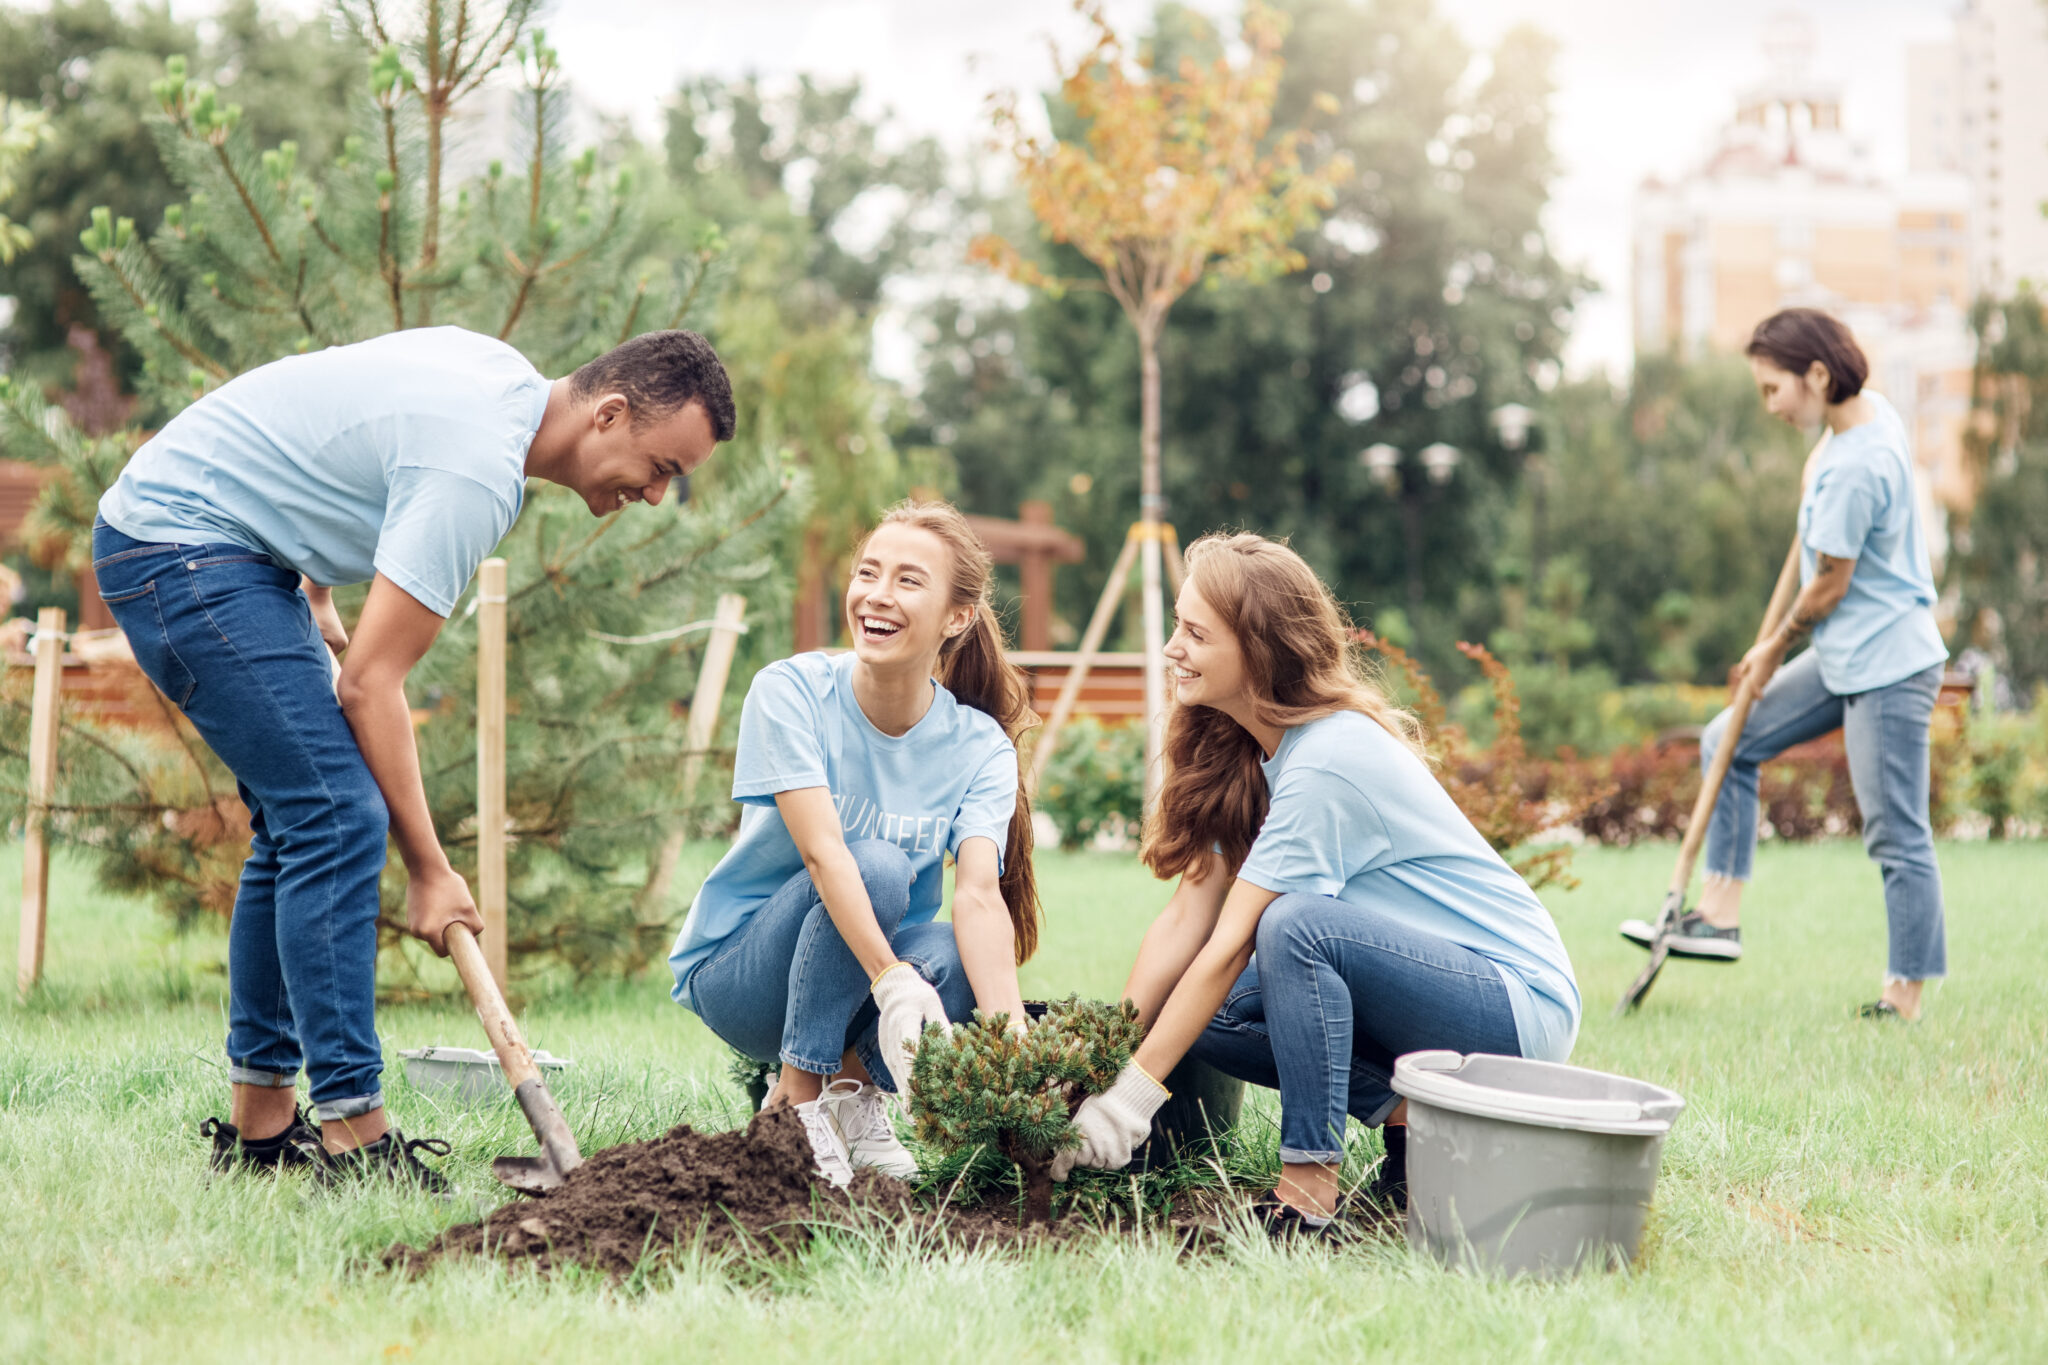 Two women and a man plant a tree together. They look at each other and laugh. This article covers how to give back to your community.